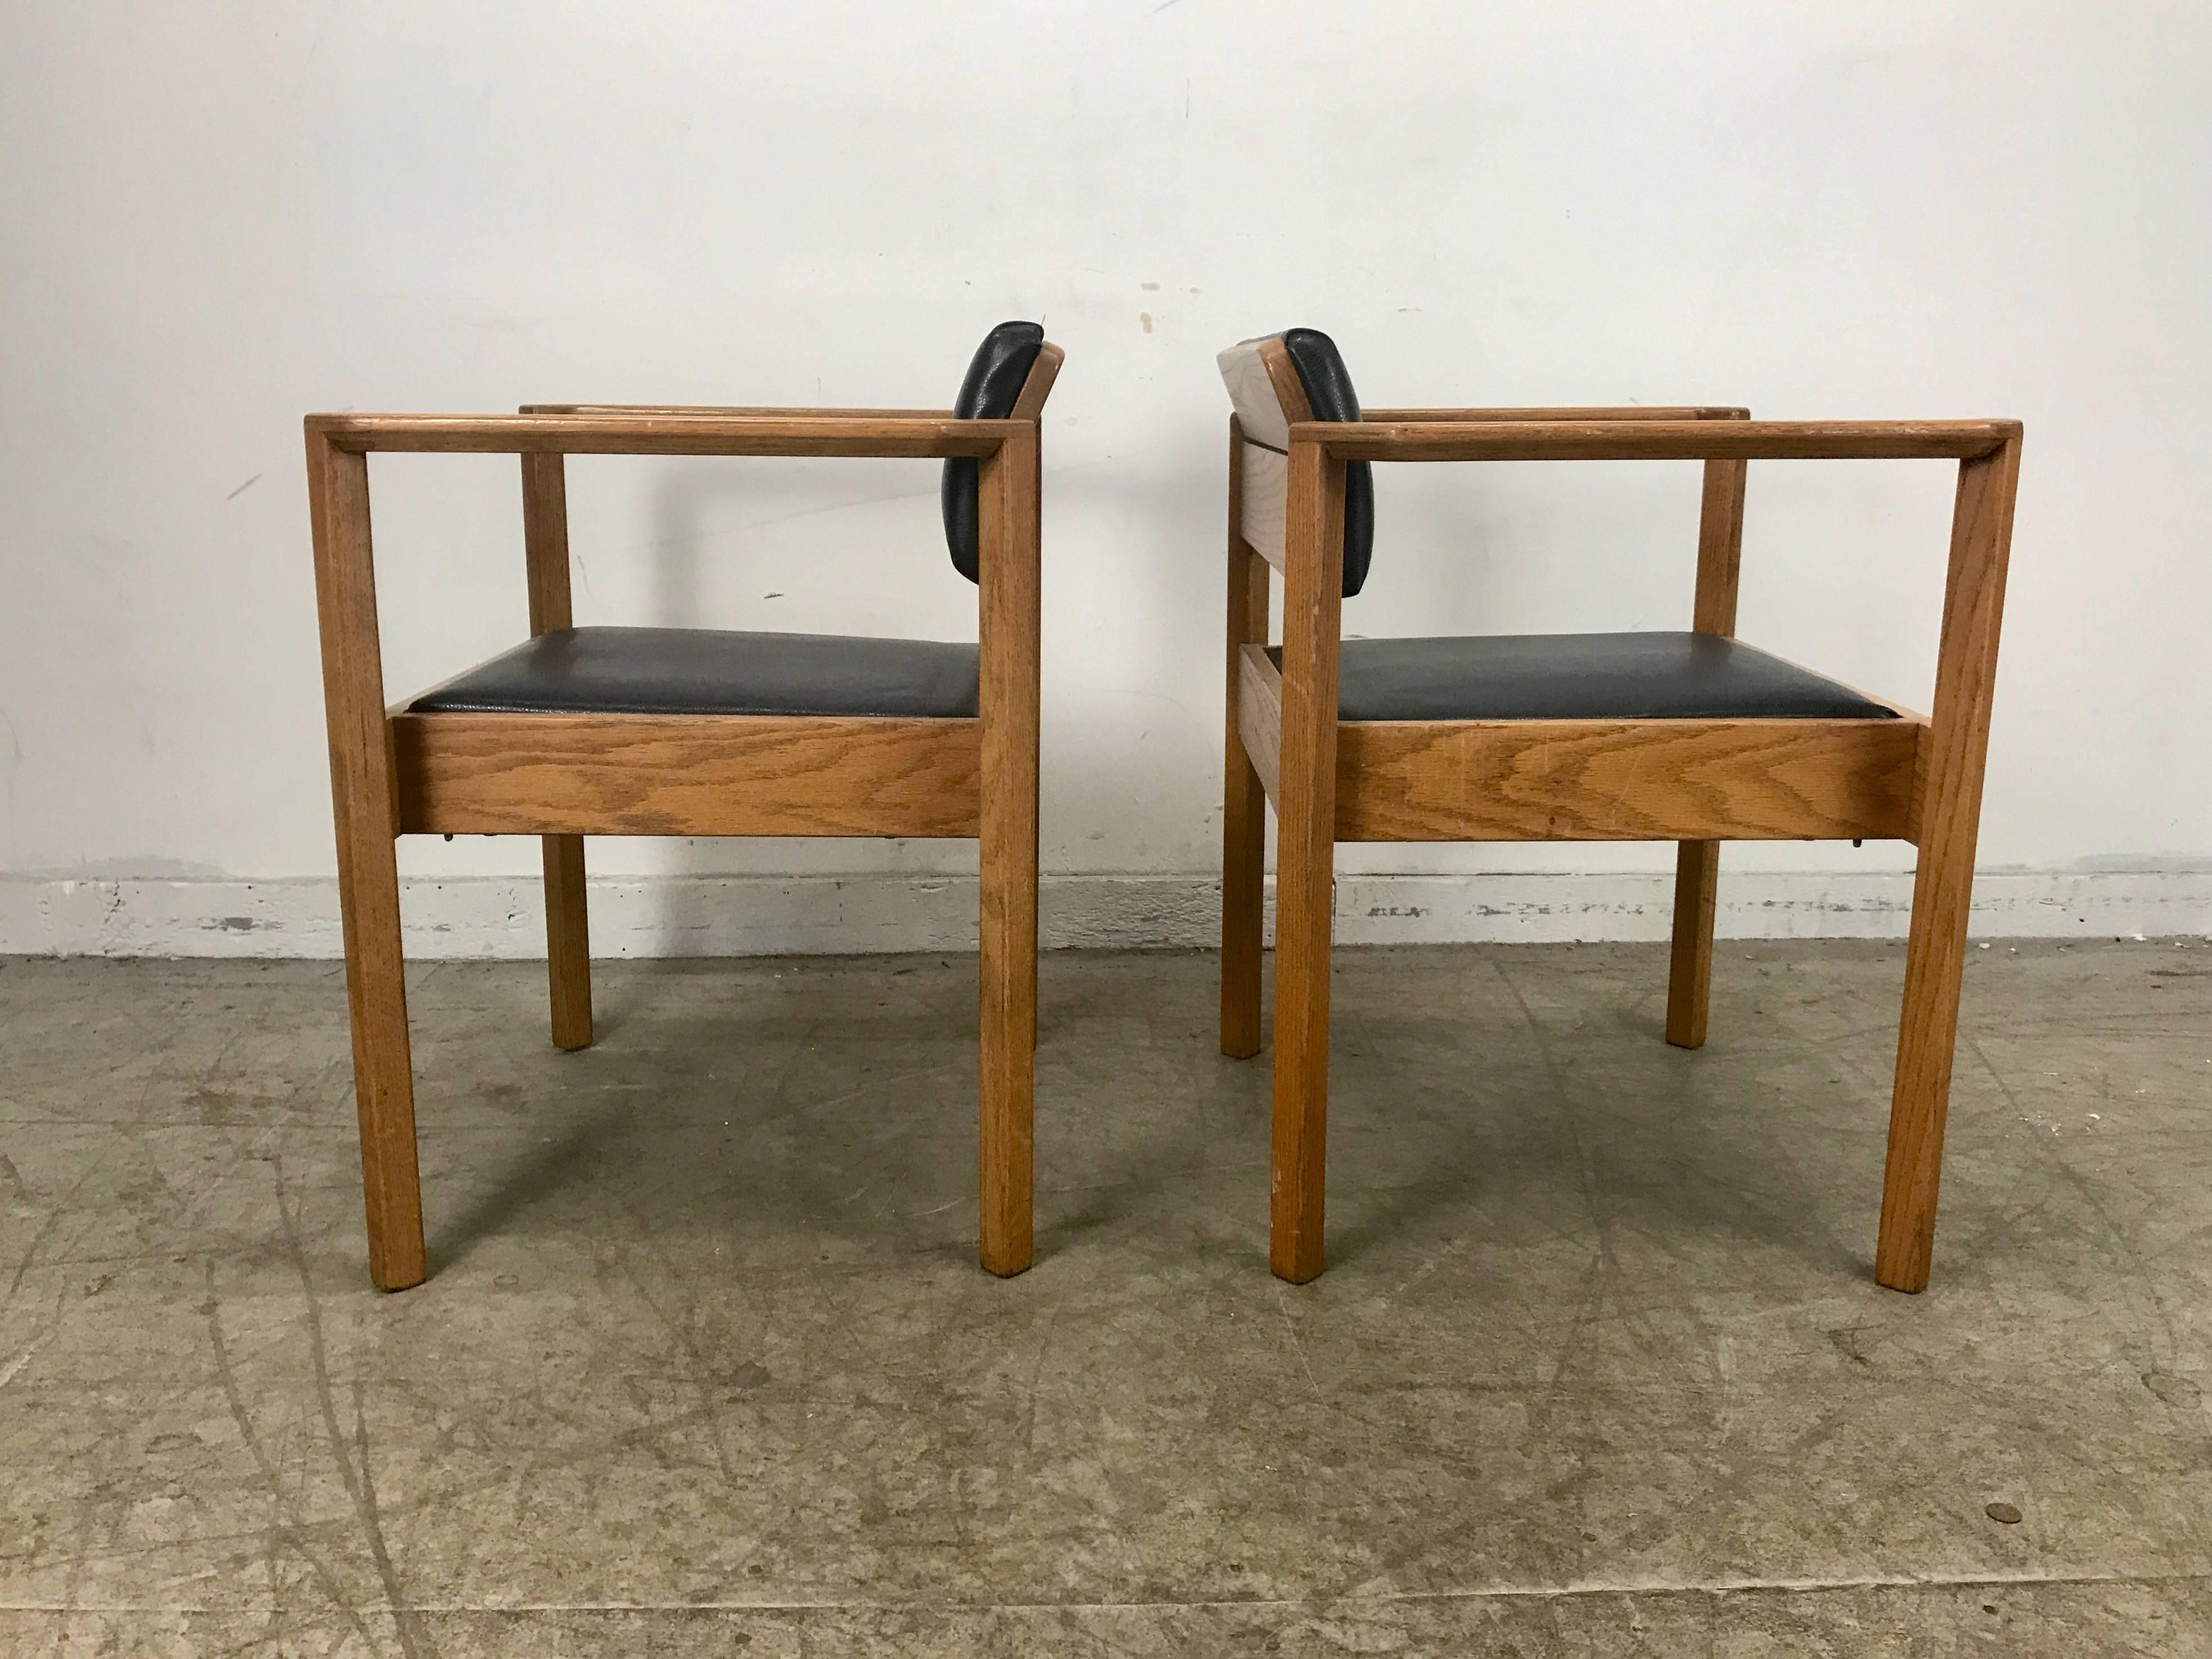 Unusual 1960s sculptural angle arm stacking armchairs, Usonium style, solid rich grained oak construction. Wonderful quality, sturdy, no wobble, Amazing style and design, recently re upholstered in slightly textured naugahyde, extremely comfortable,